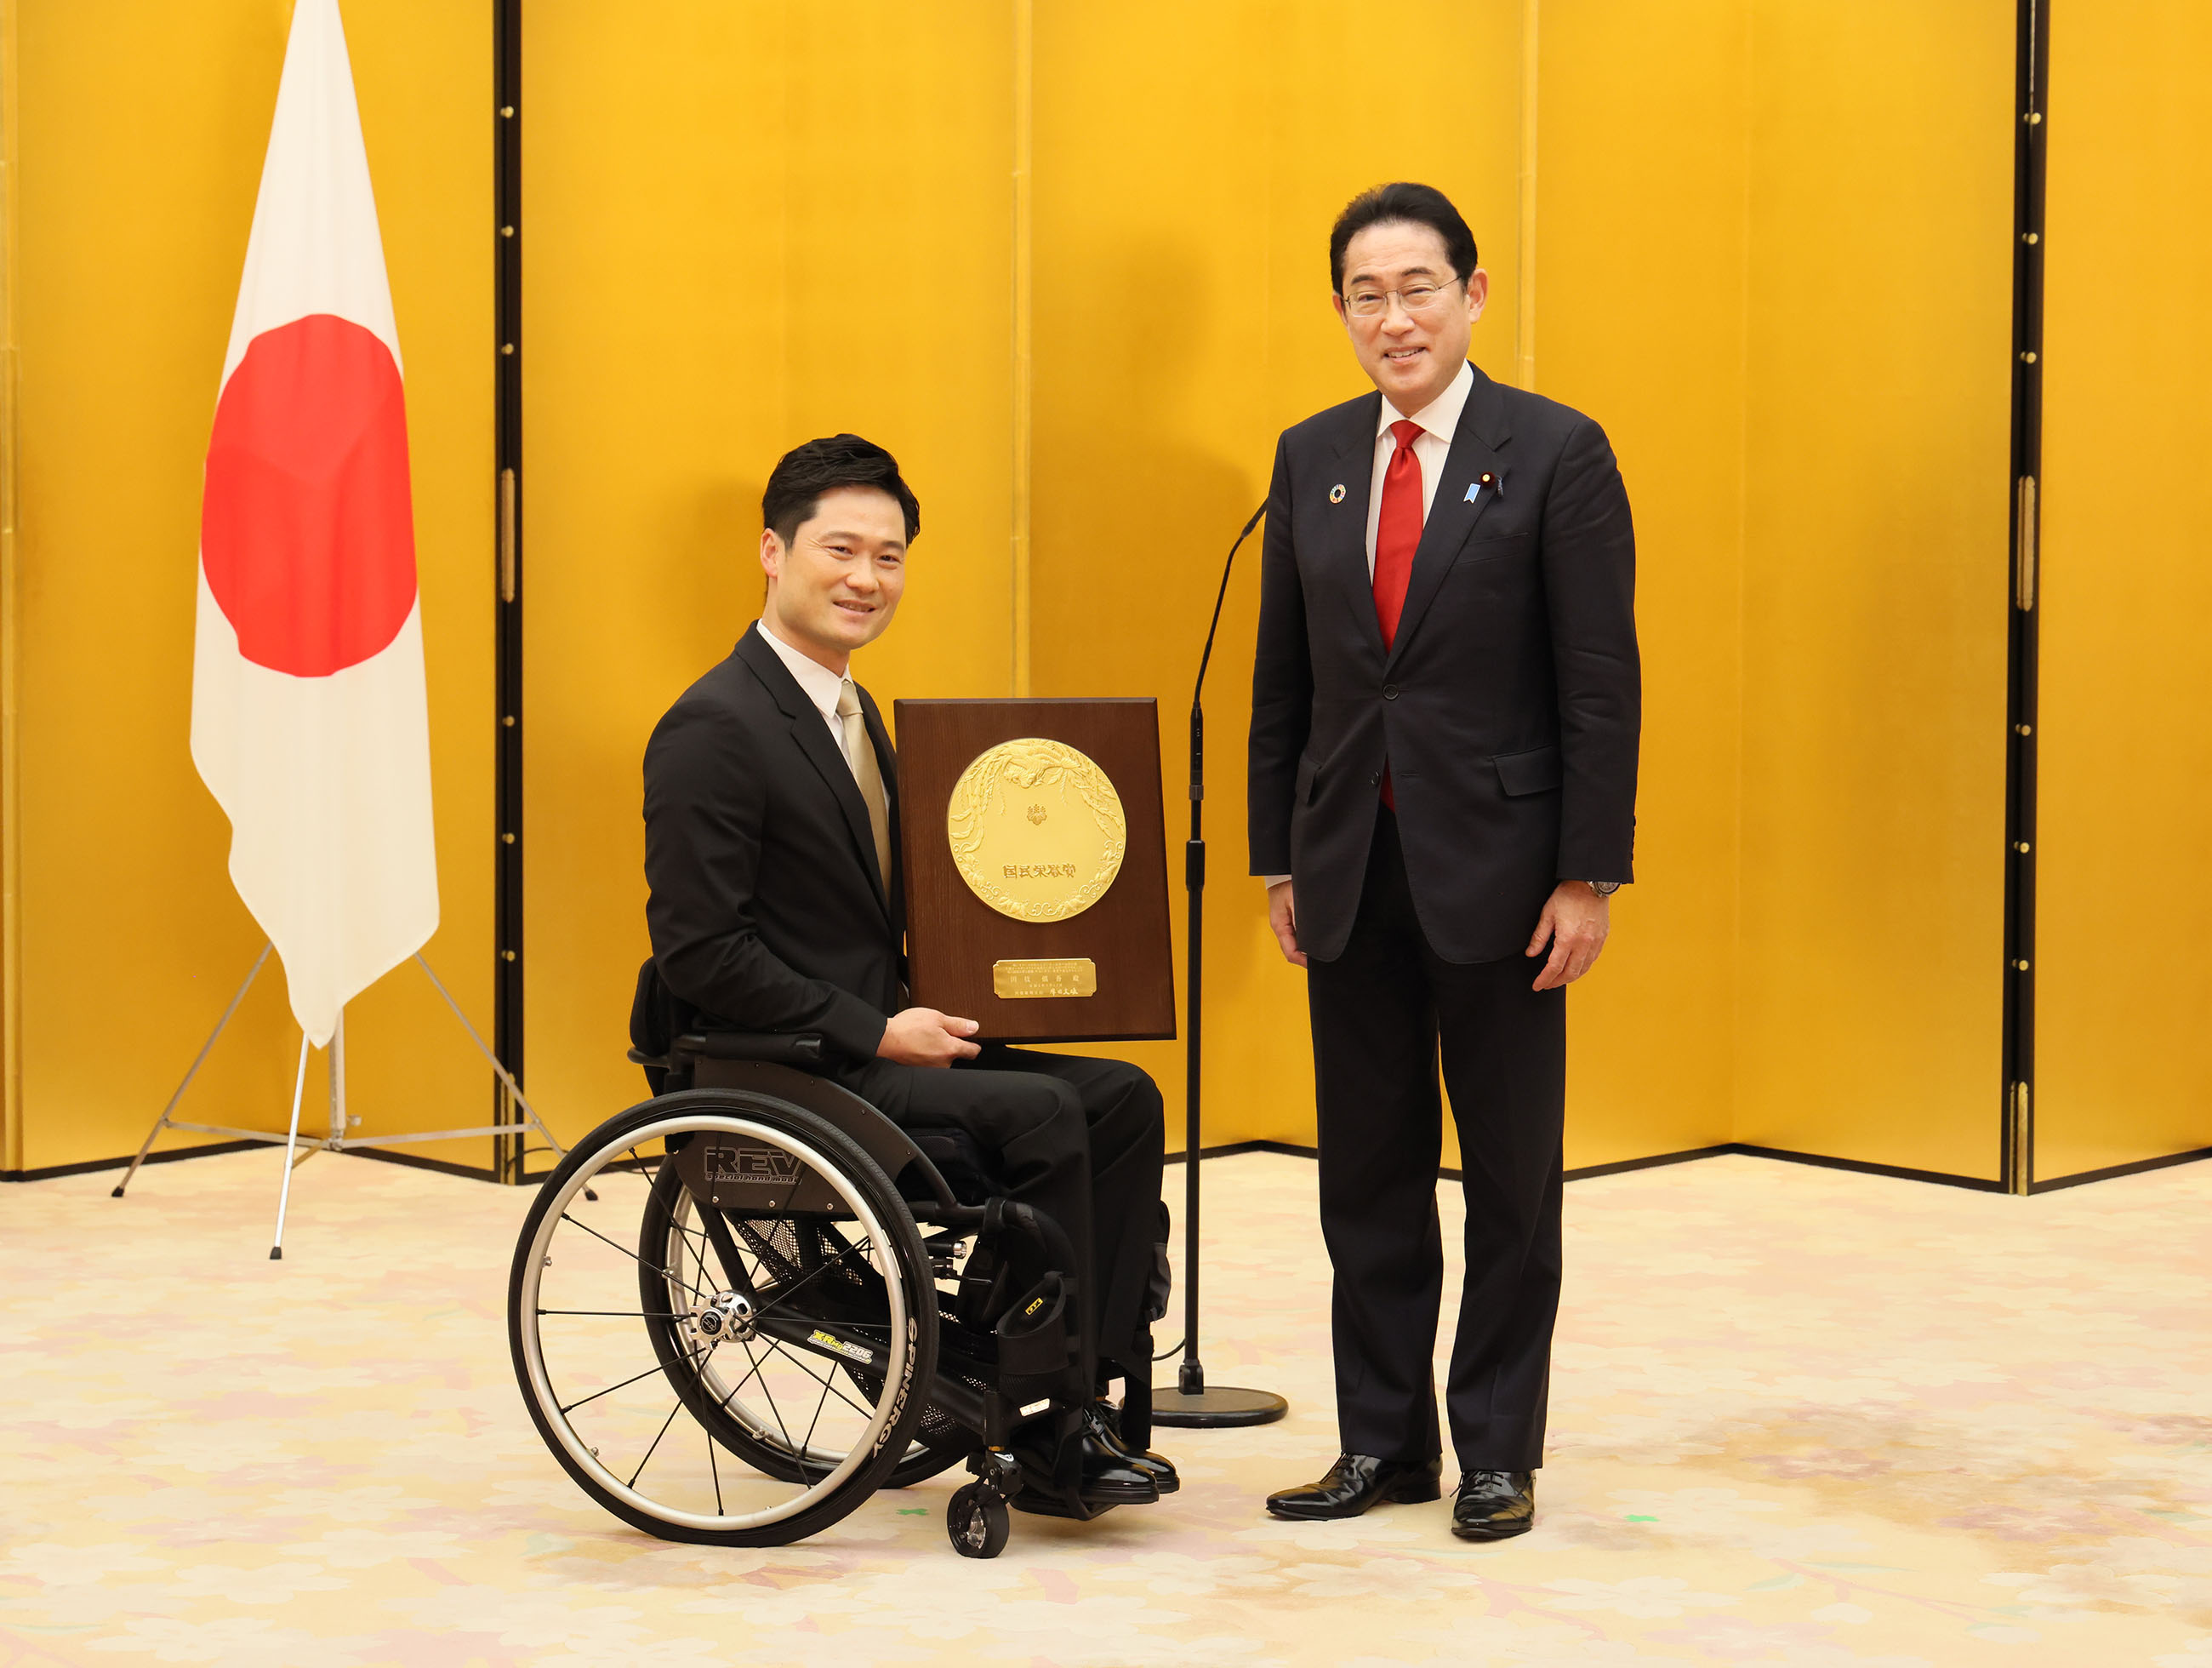 Presentation of the People’s Honor Award